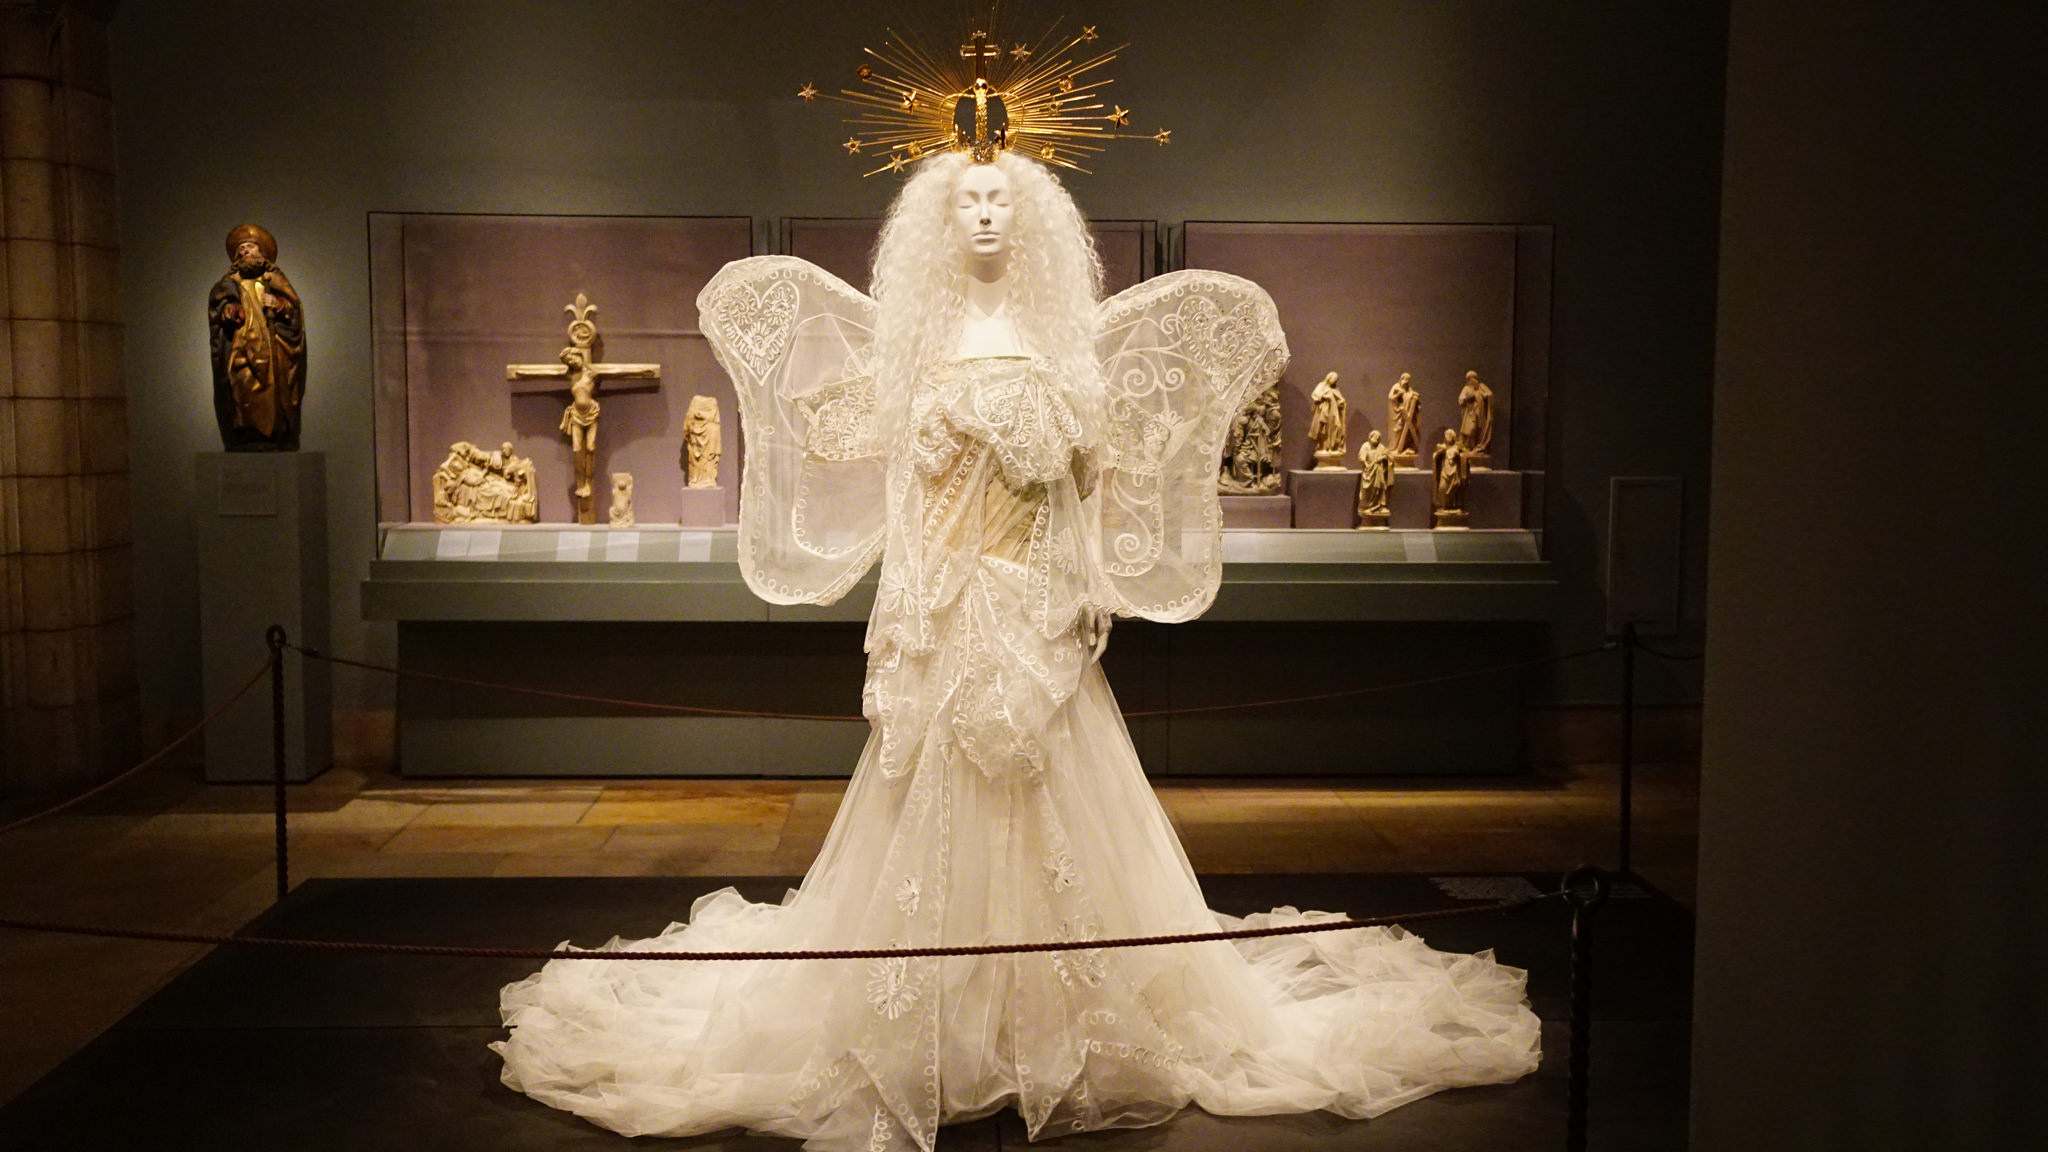 heavenly bodies8 Heavenly Bodies: Fashion and the Catholic Imagination in MET